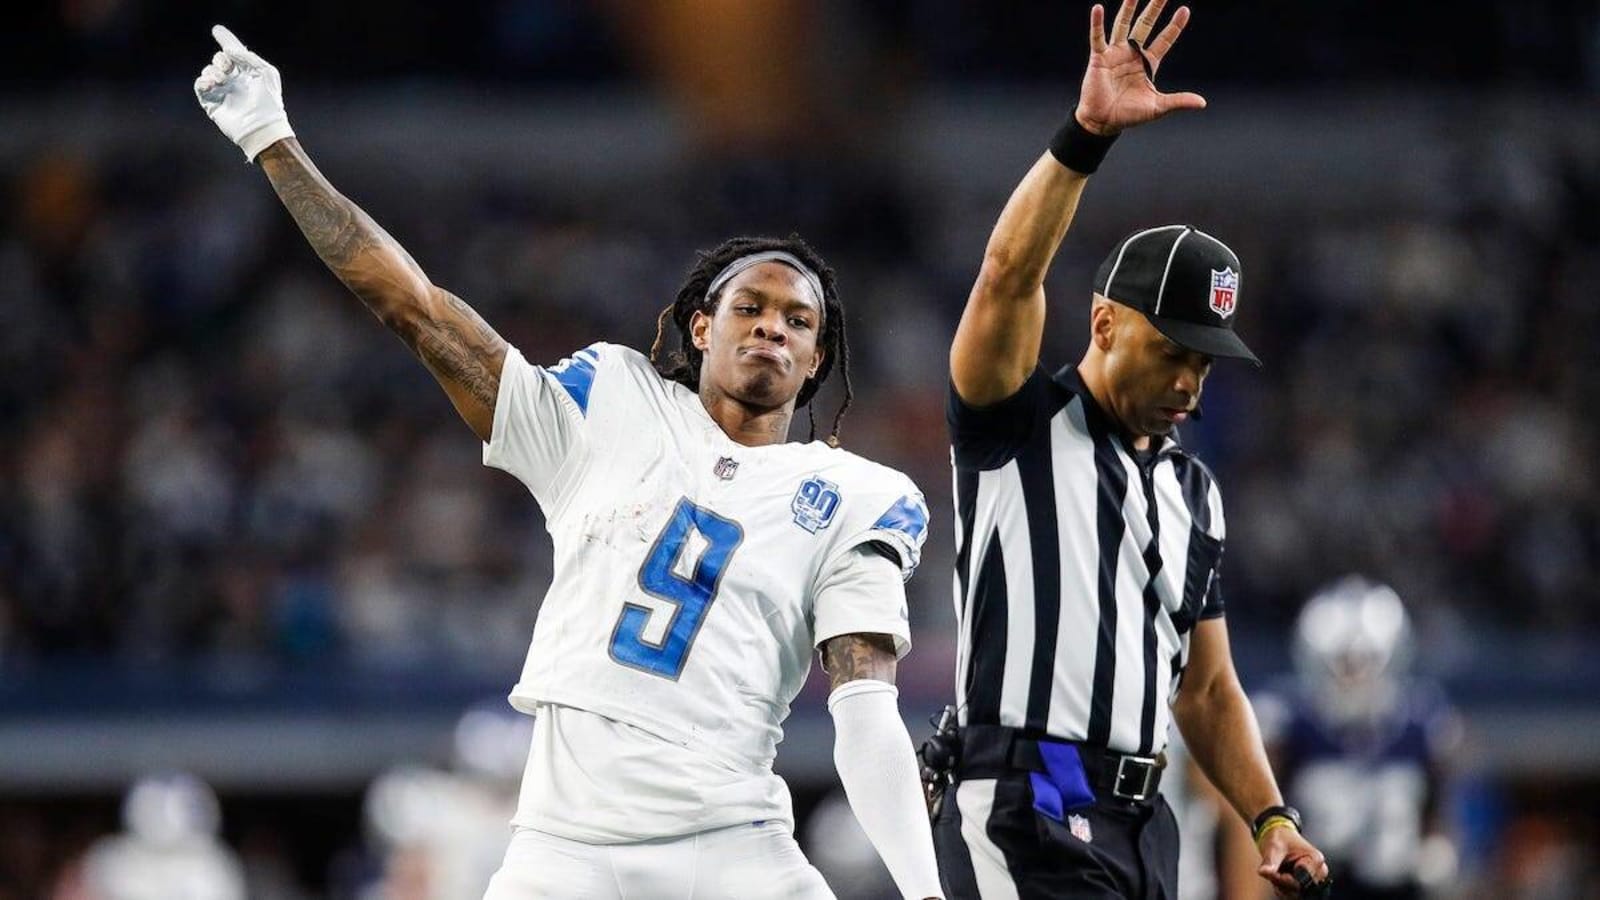 Jameson Williams outruns 49ers defense on end around, gives Lions early lead in NFC Championship